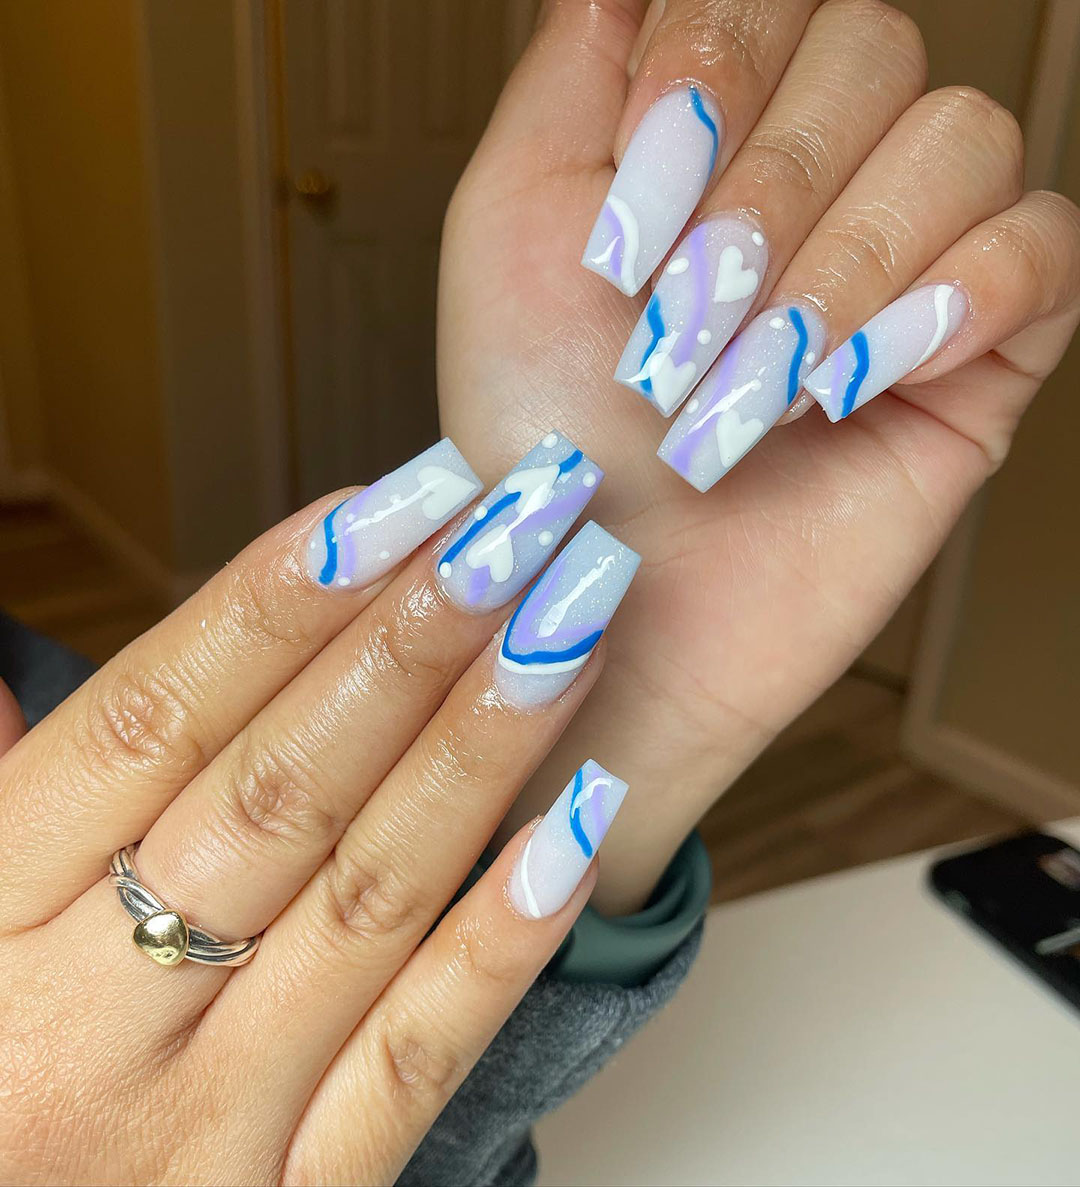 nail art with sky blue valentines design.